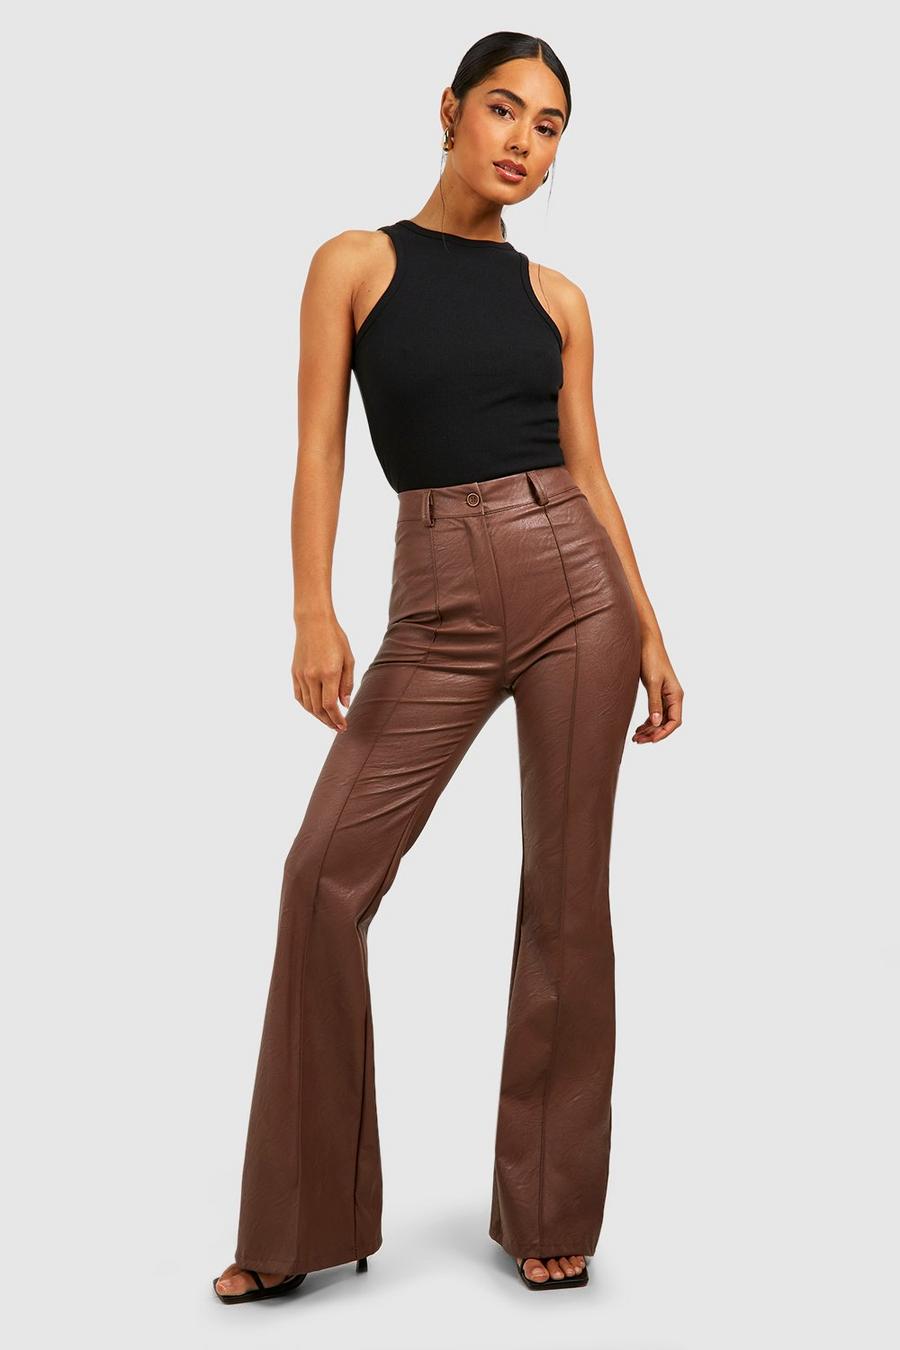 Chocolate braun Leather Look High Waisted Seam Front Flared Trousers